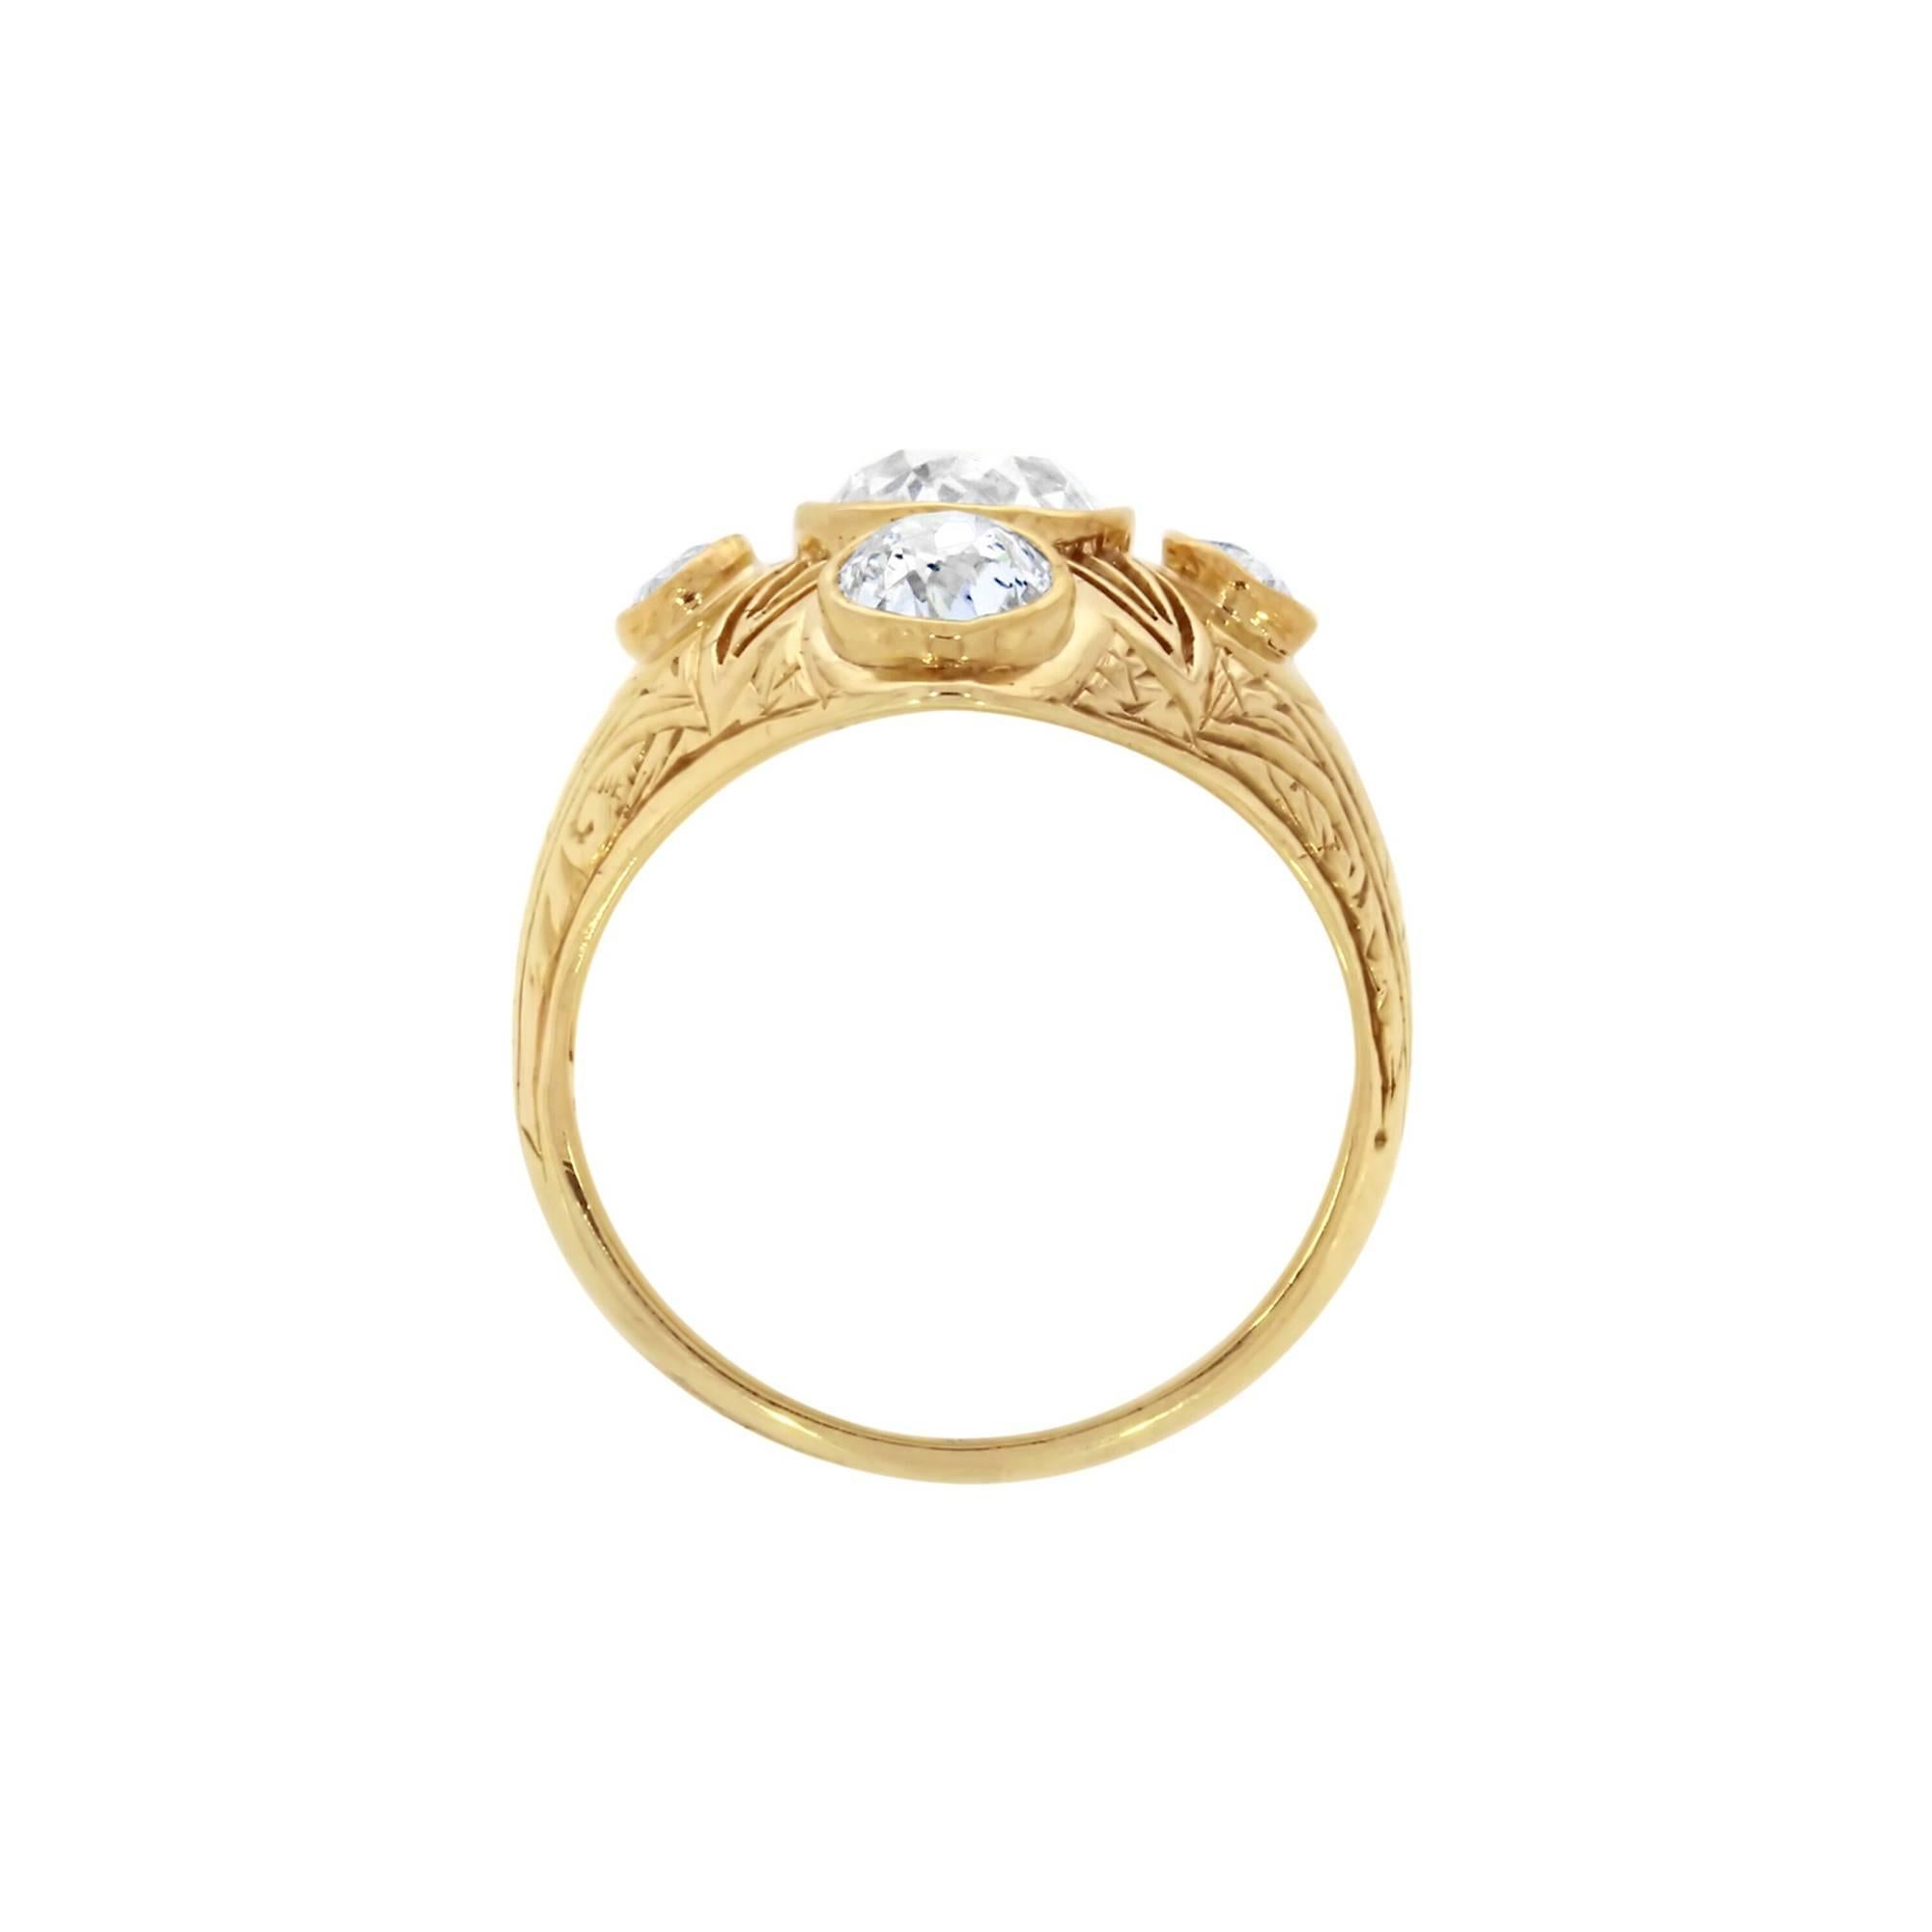 A fine example of Victorian jewellery, this yellow gold ring features at the centre of it an old cushion shaped diamond. Set around the central diamond are four smaller old cushion cut diamonds. The ring has been delicately engraved, and